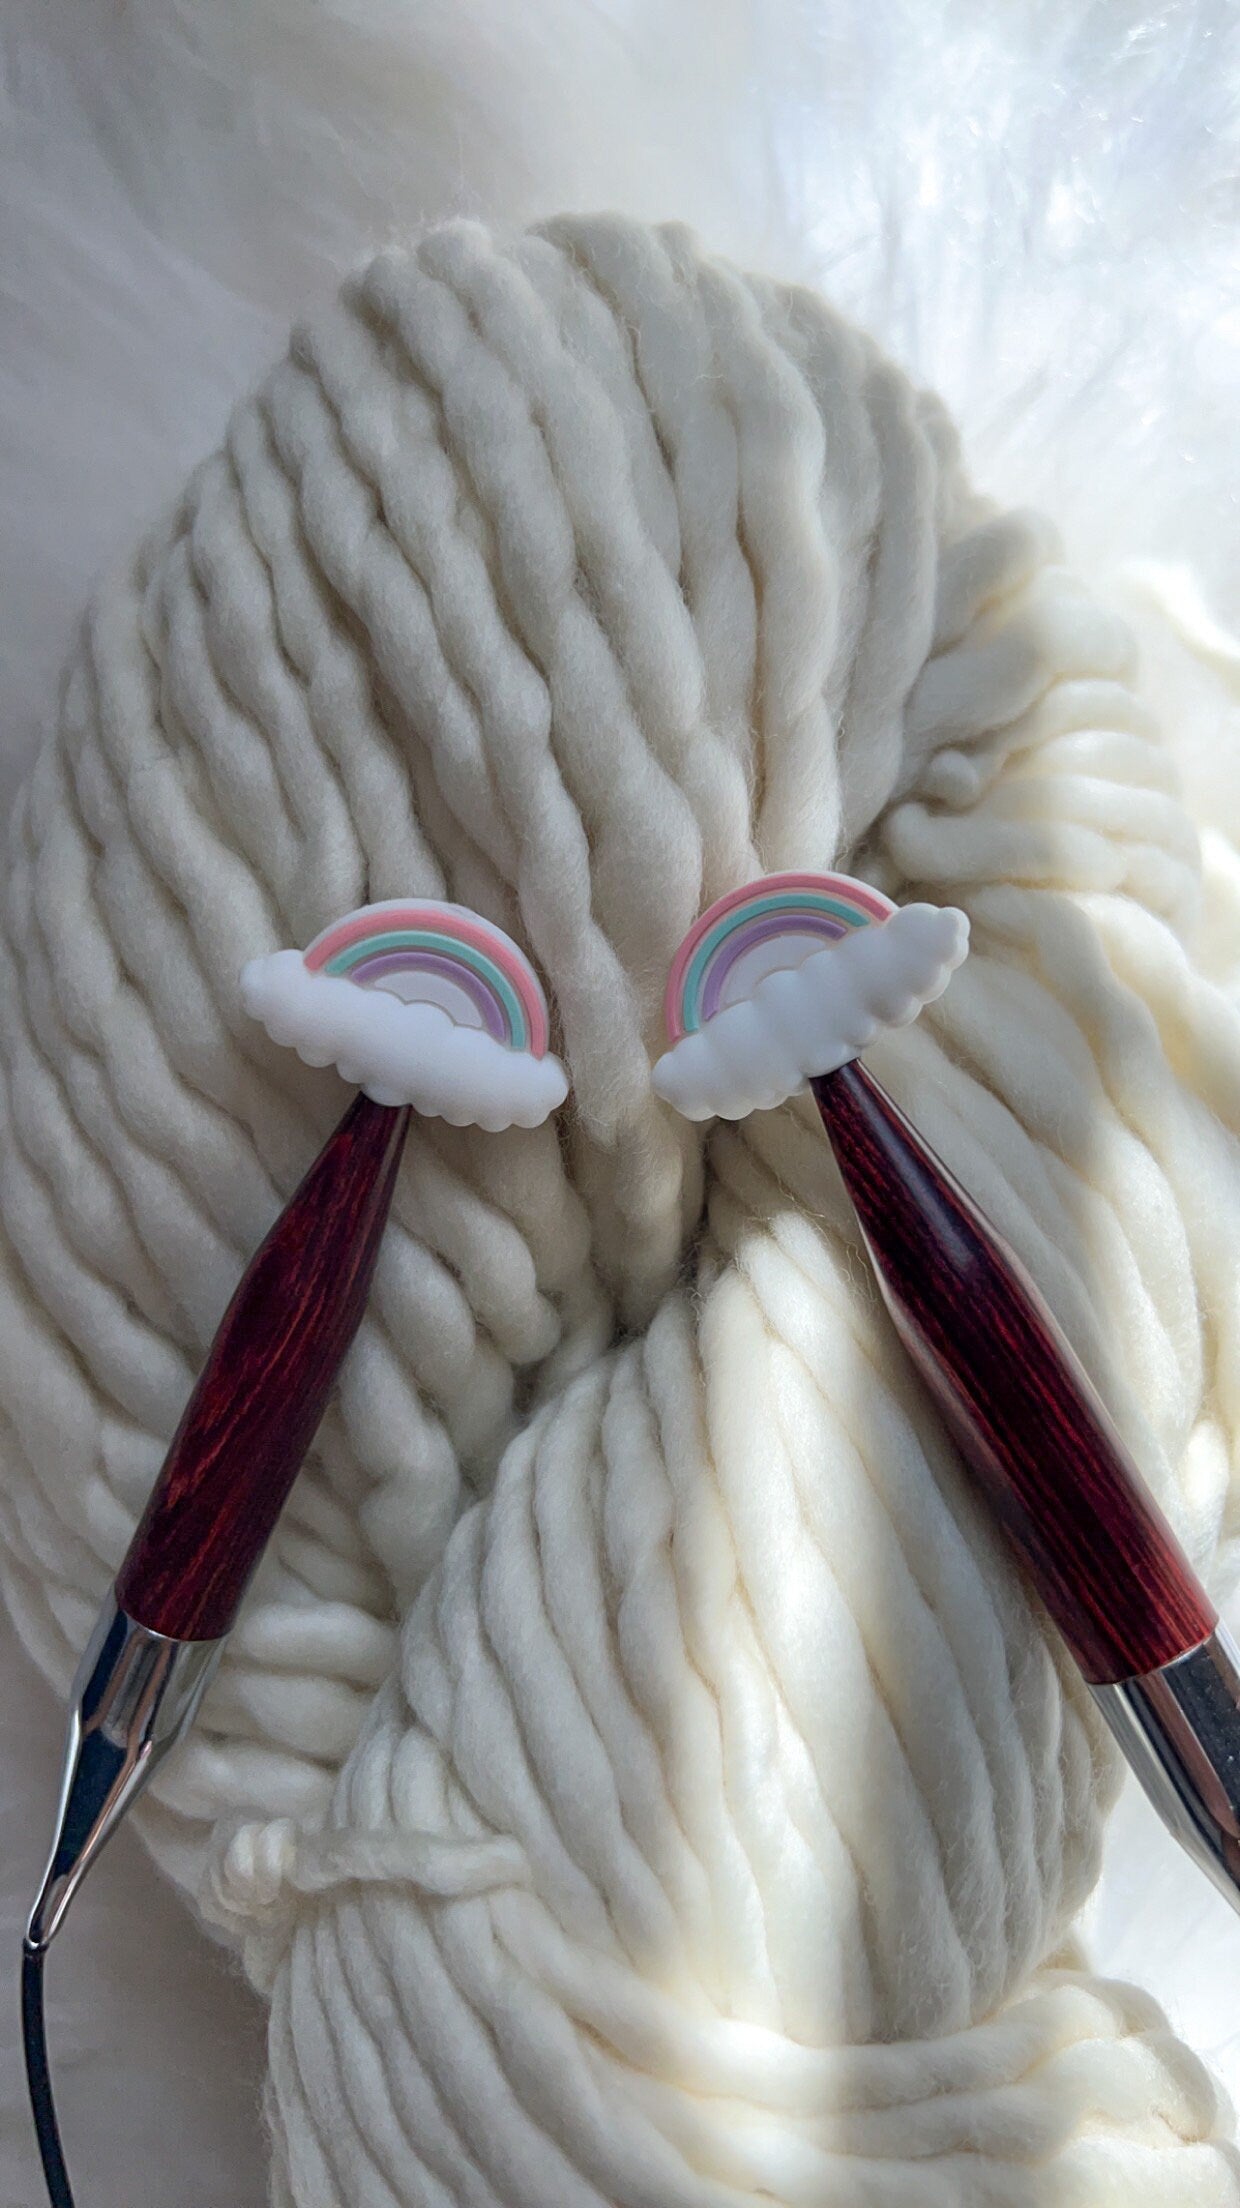 Mini Rainbow Stitch Stoppers, Needle Protectors, Knitting Tool